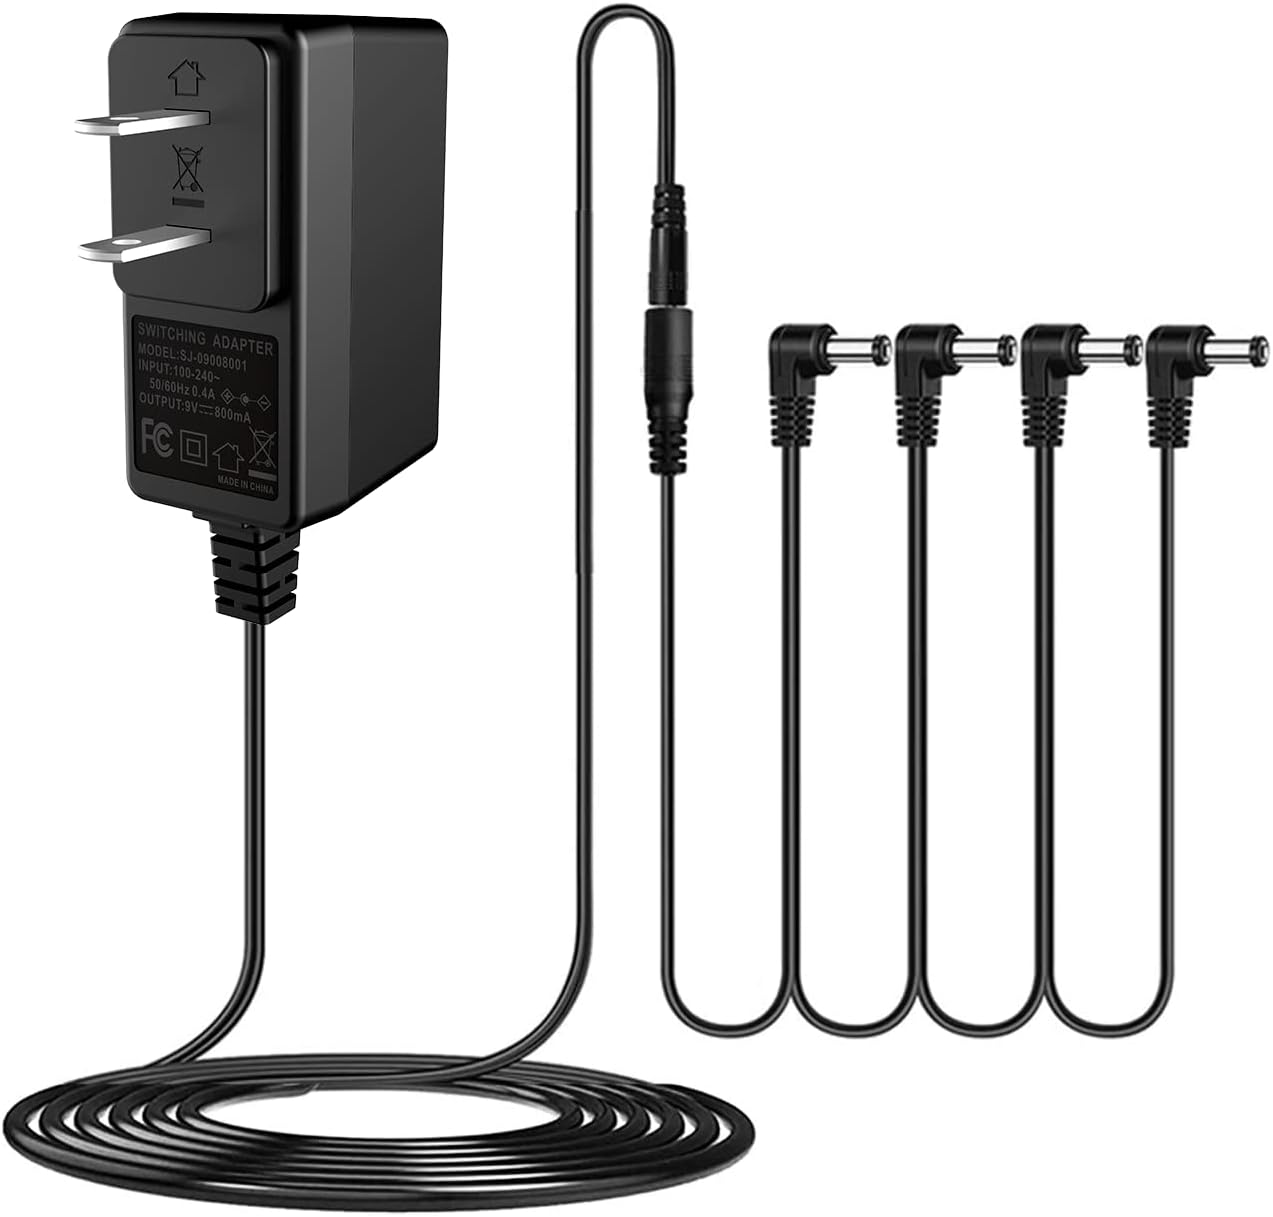 DC 9V Guitar Pedal Power Supply (800mA -1A) AC Wall Charger Adapter with 4 Way Daisy Chain Pedal Cables (8.8 FT), Compat - Click Image to Close